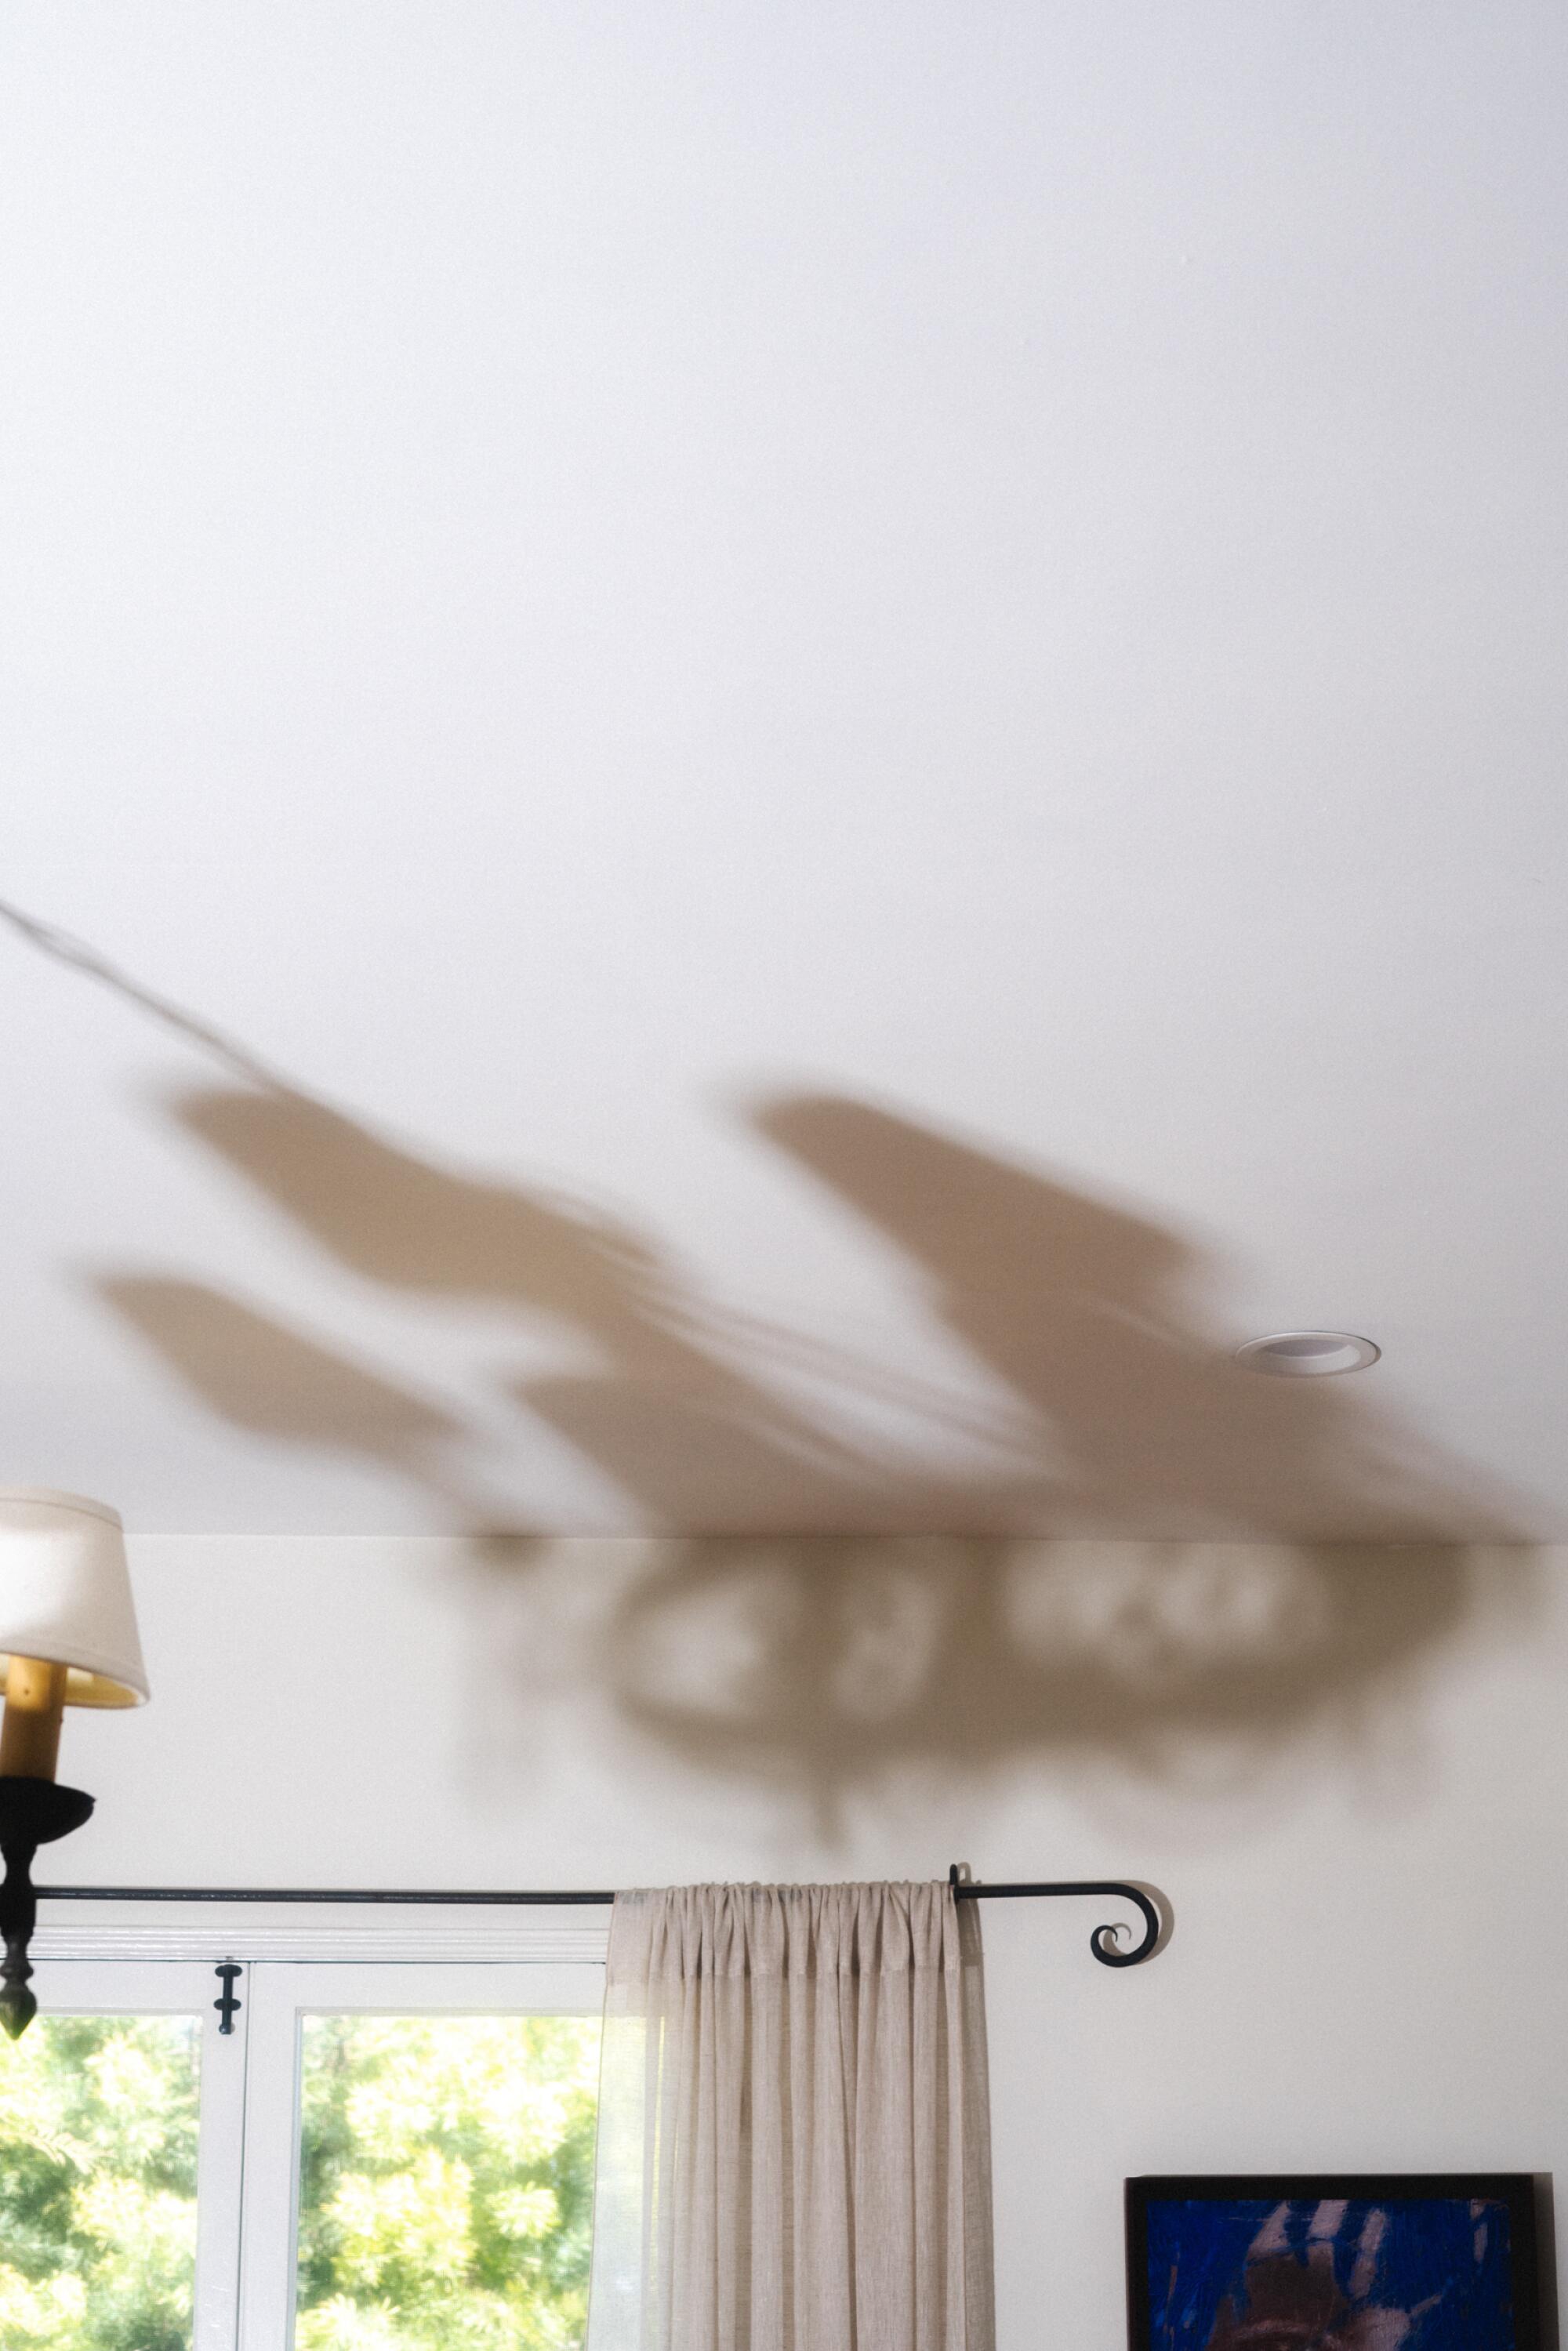 A picture of a ceiling with the large shadow of a hanging lamp.